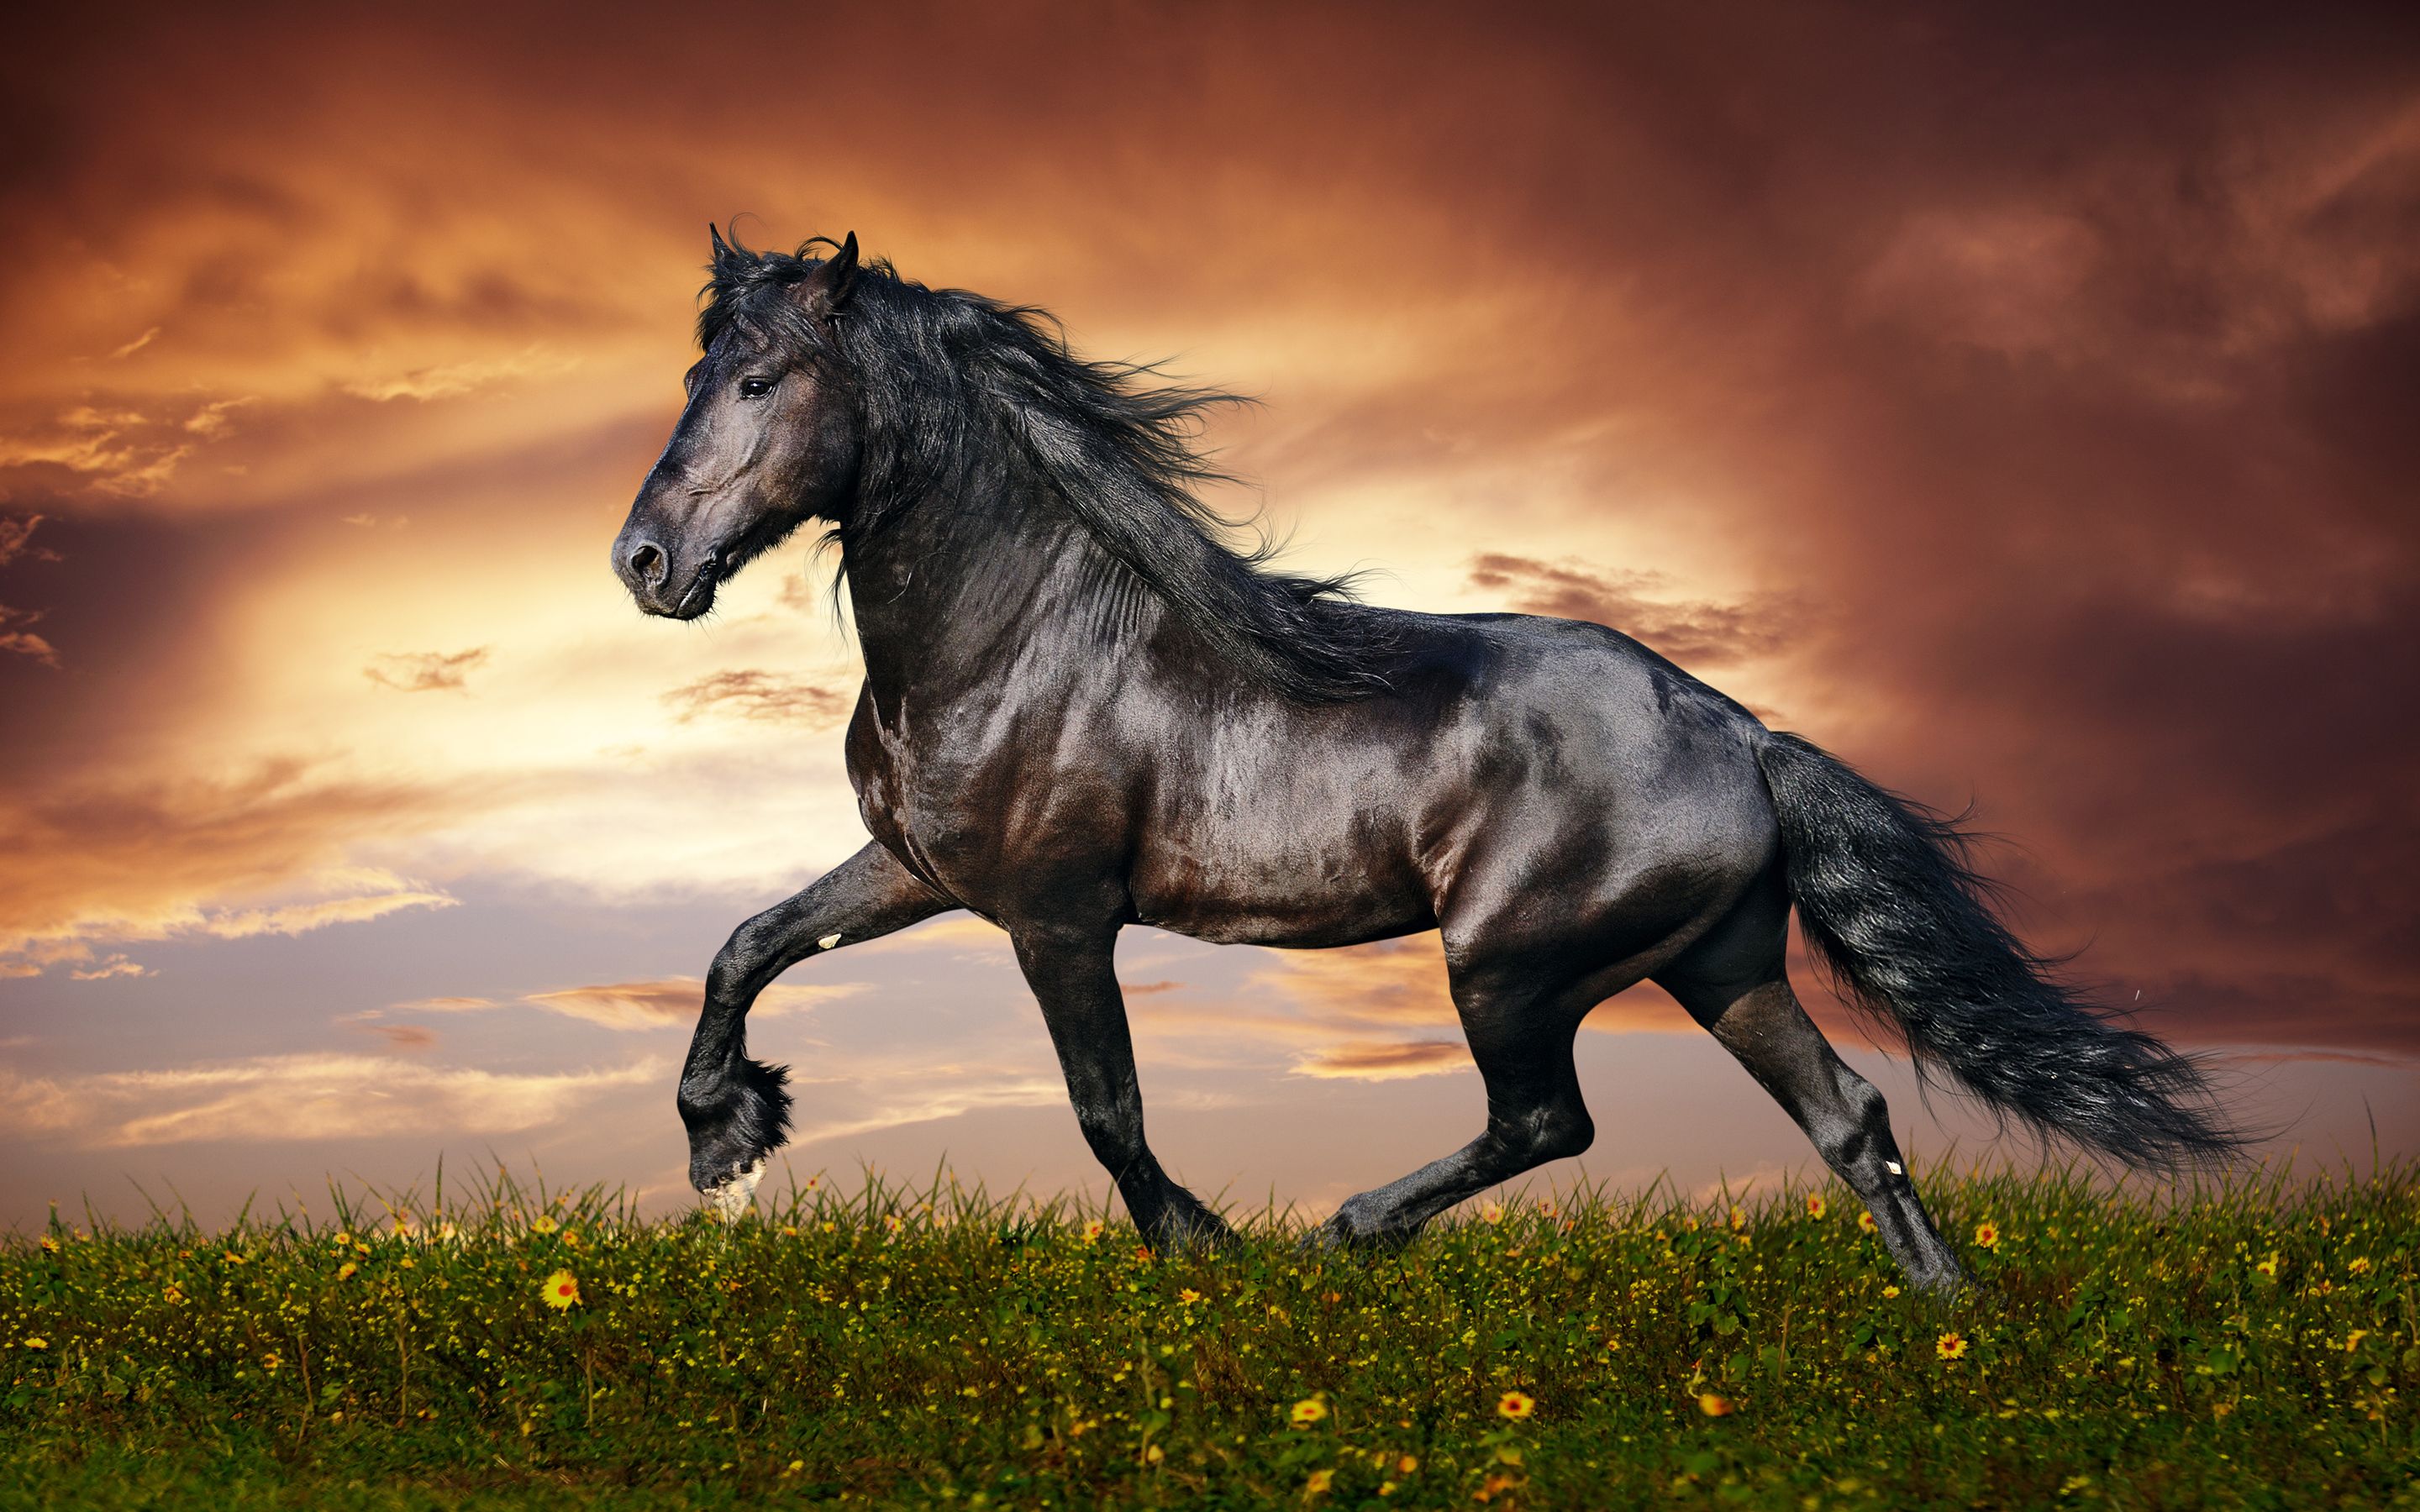 35 Most Beautiful Horse Pictures and Images | Horses: Real and ...